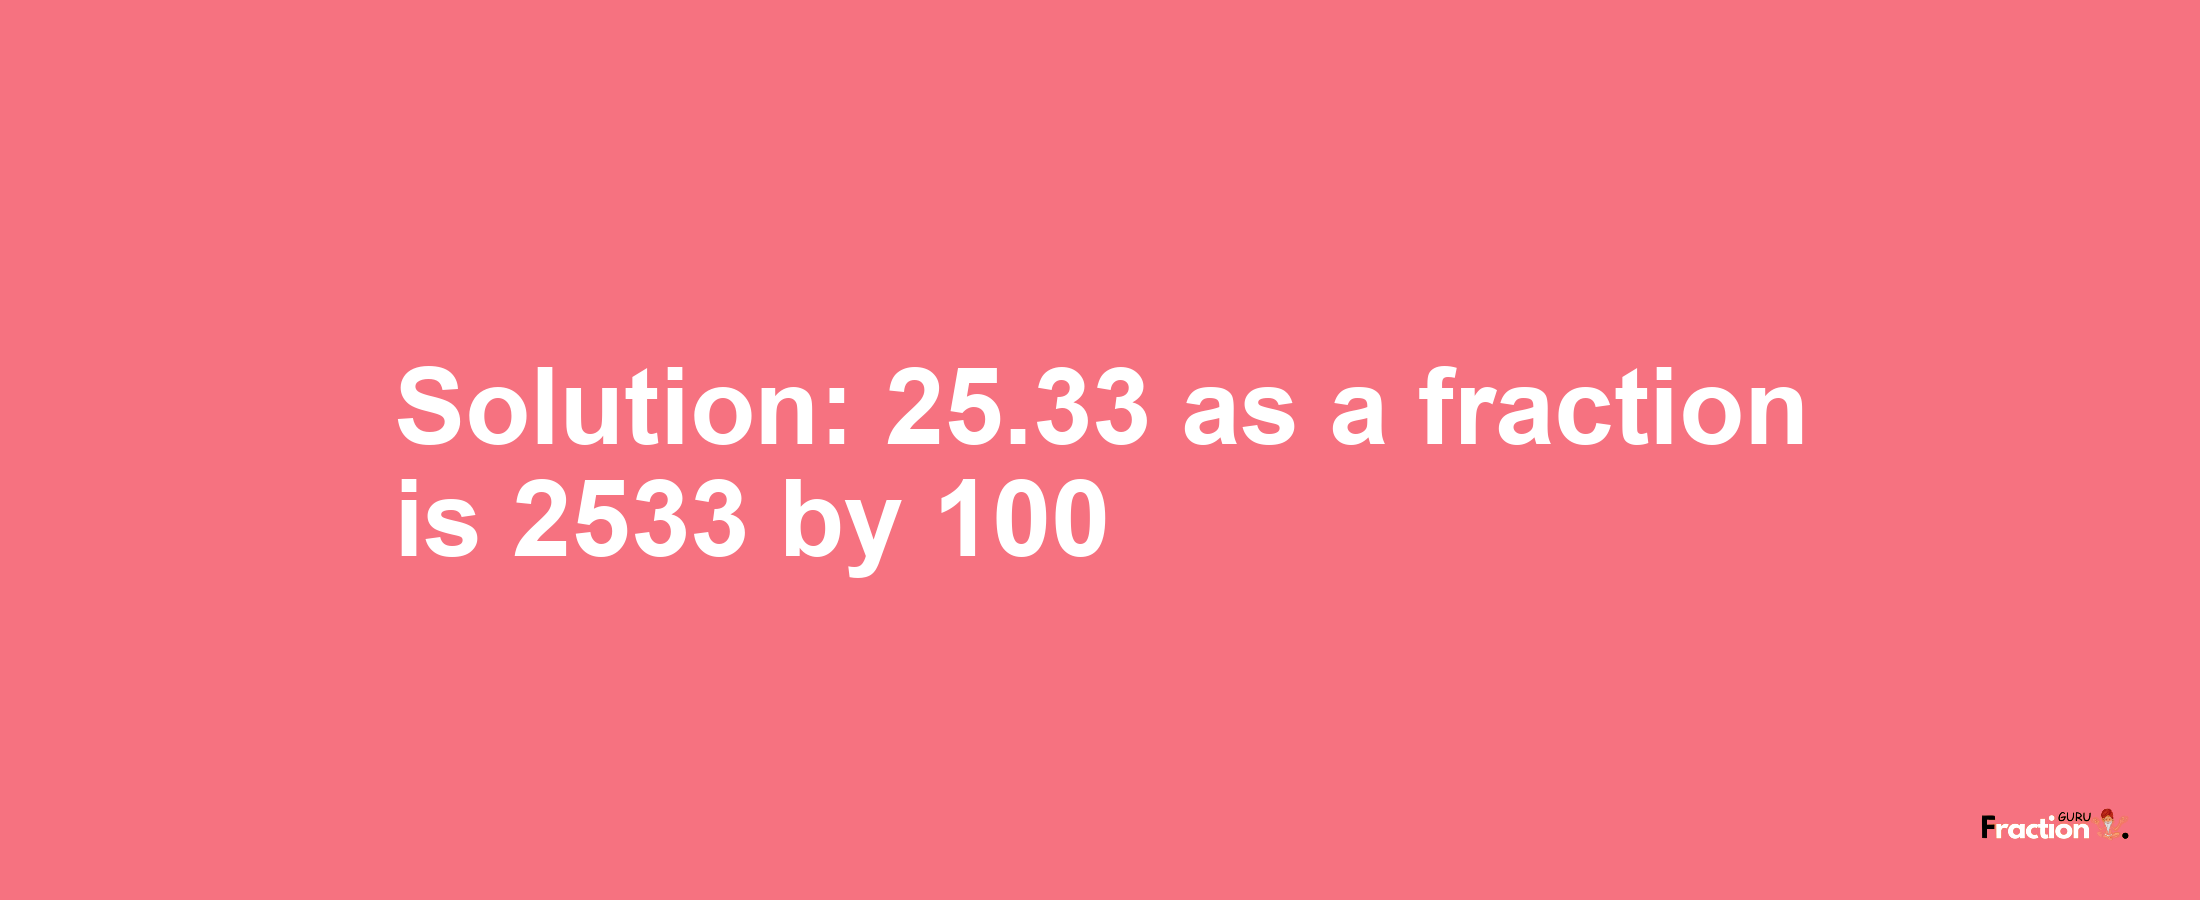 Solution:25.33 as a fraction is 2533/100